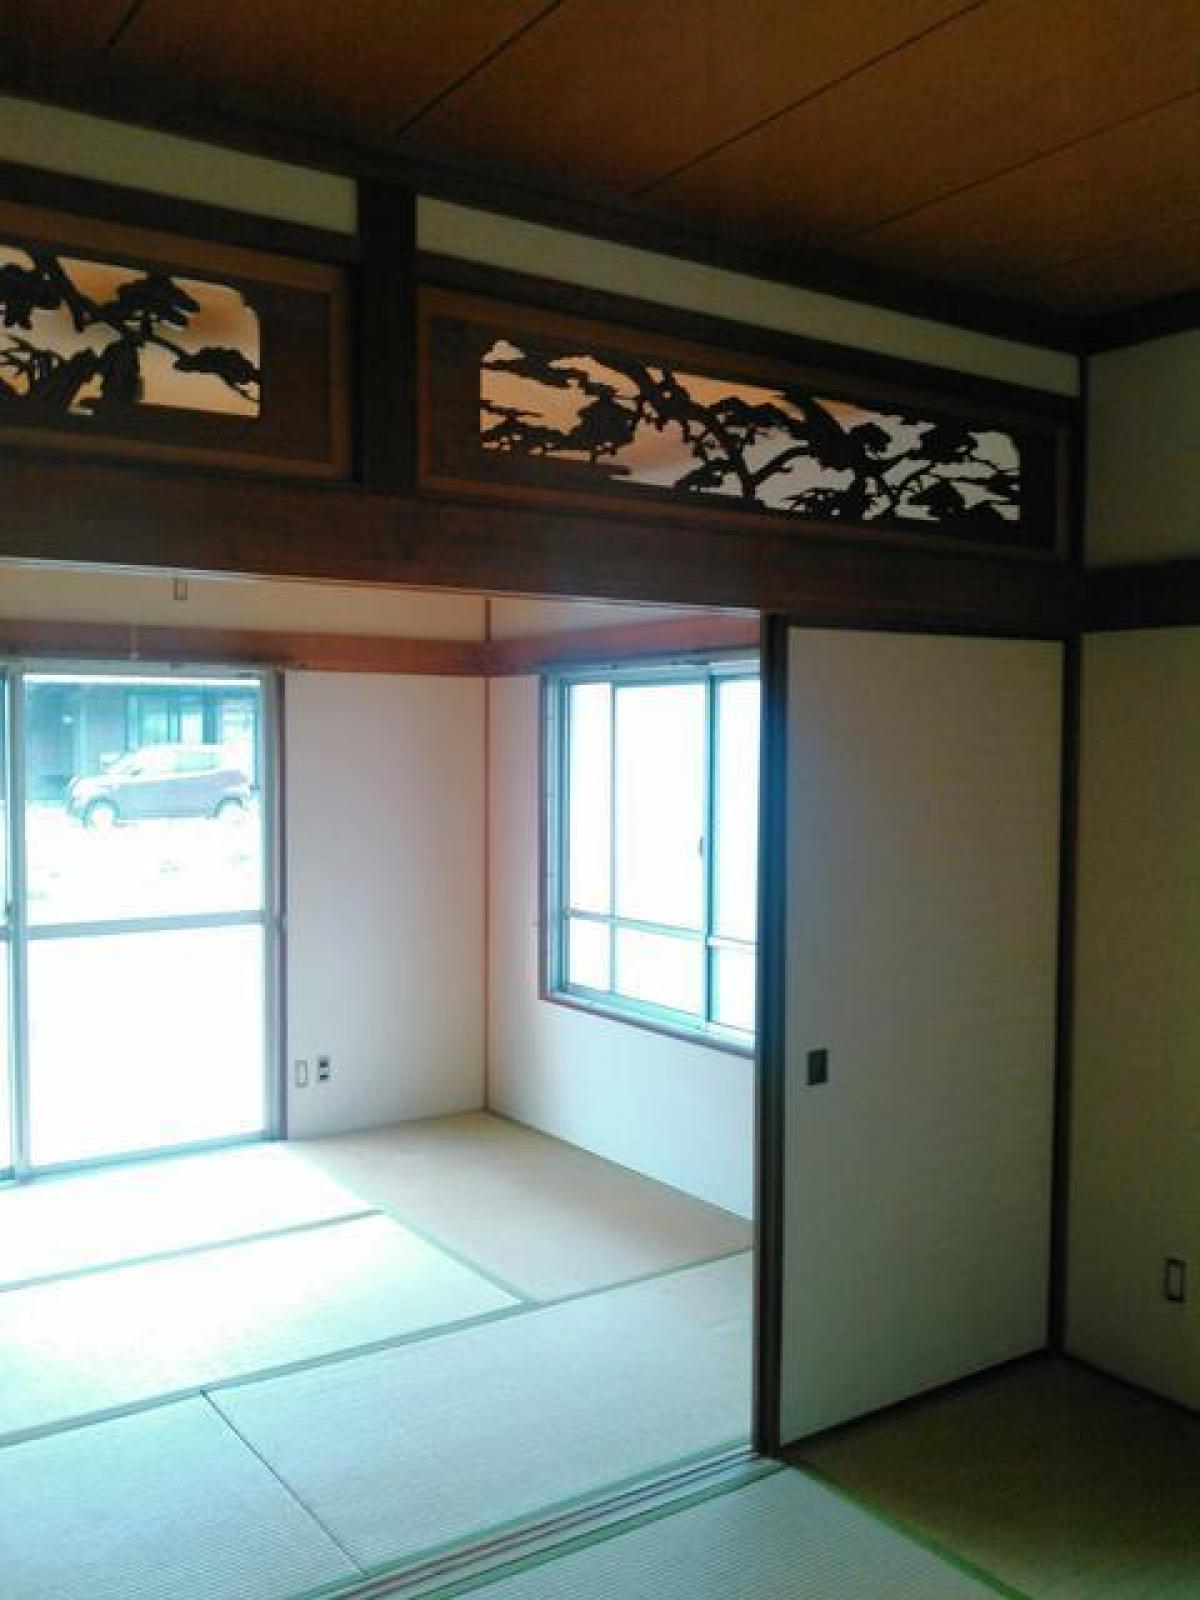 Picture of Home For Sale in Shikokuchuo Shi, Ehime, Japan